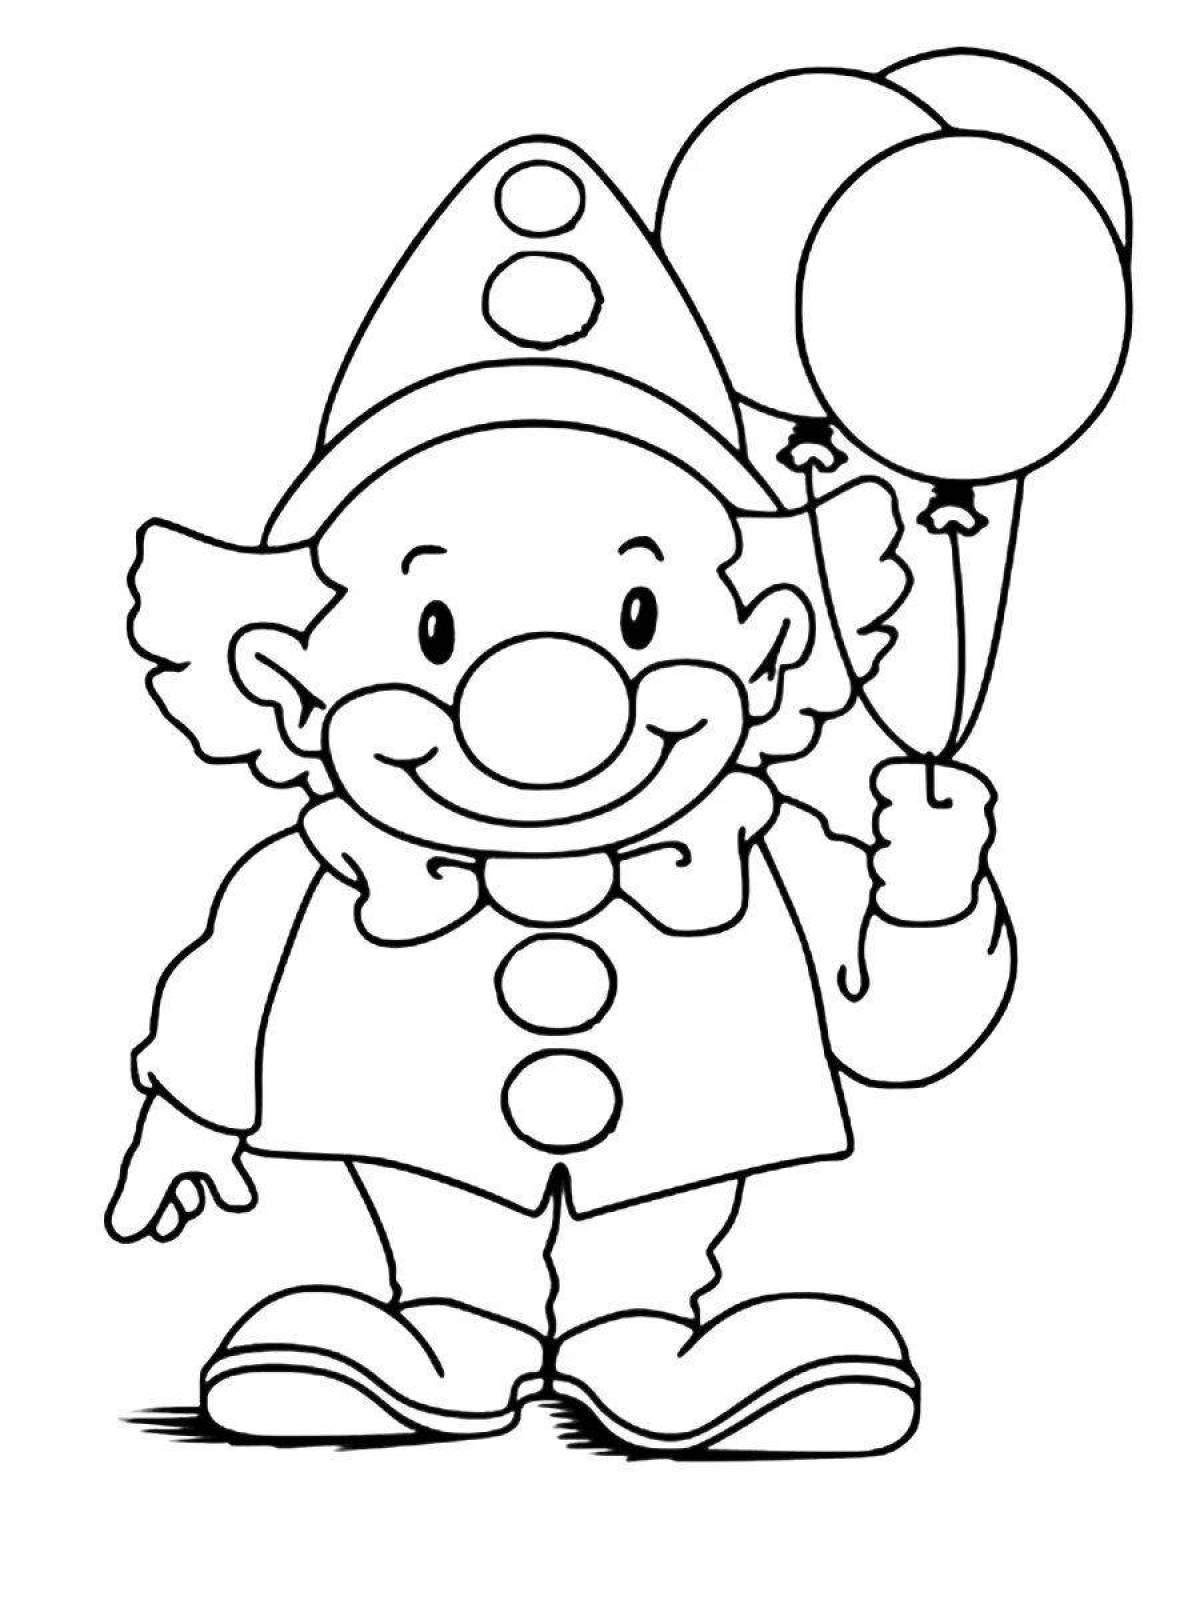 Adorable funny clown coloring book for kids